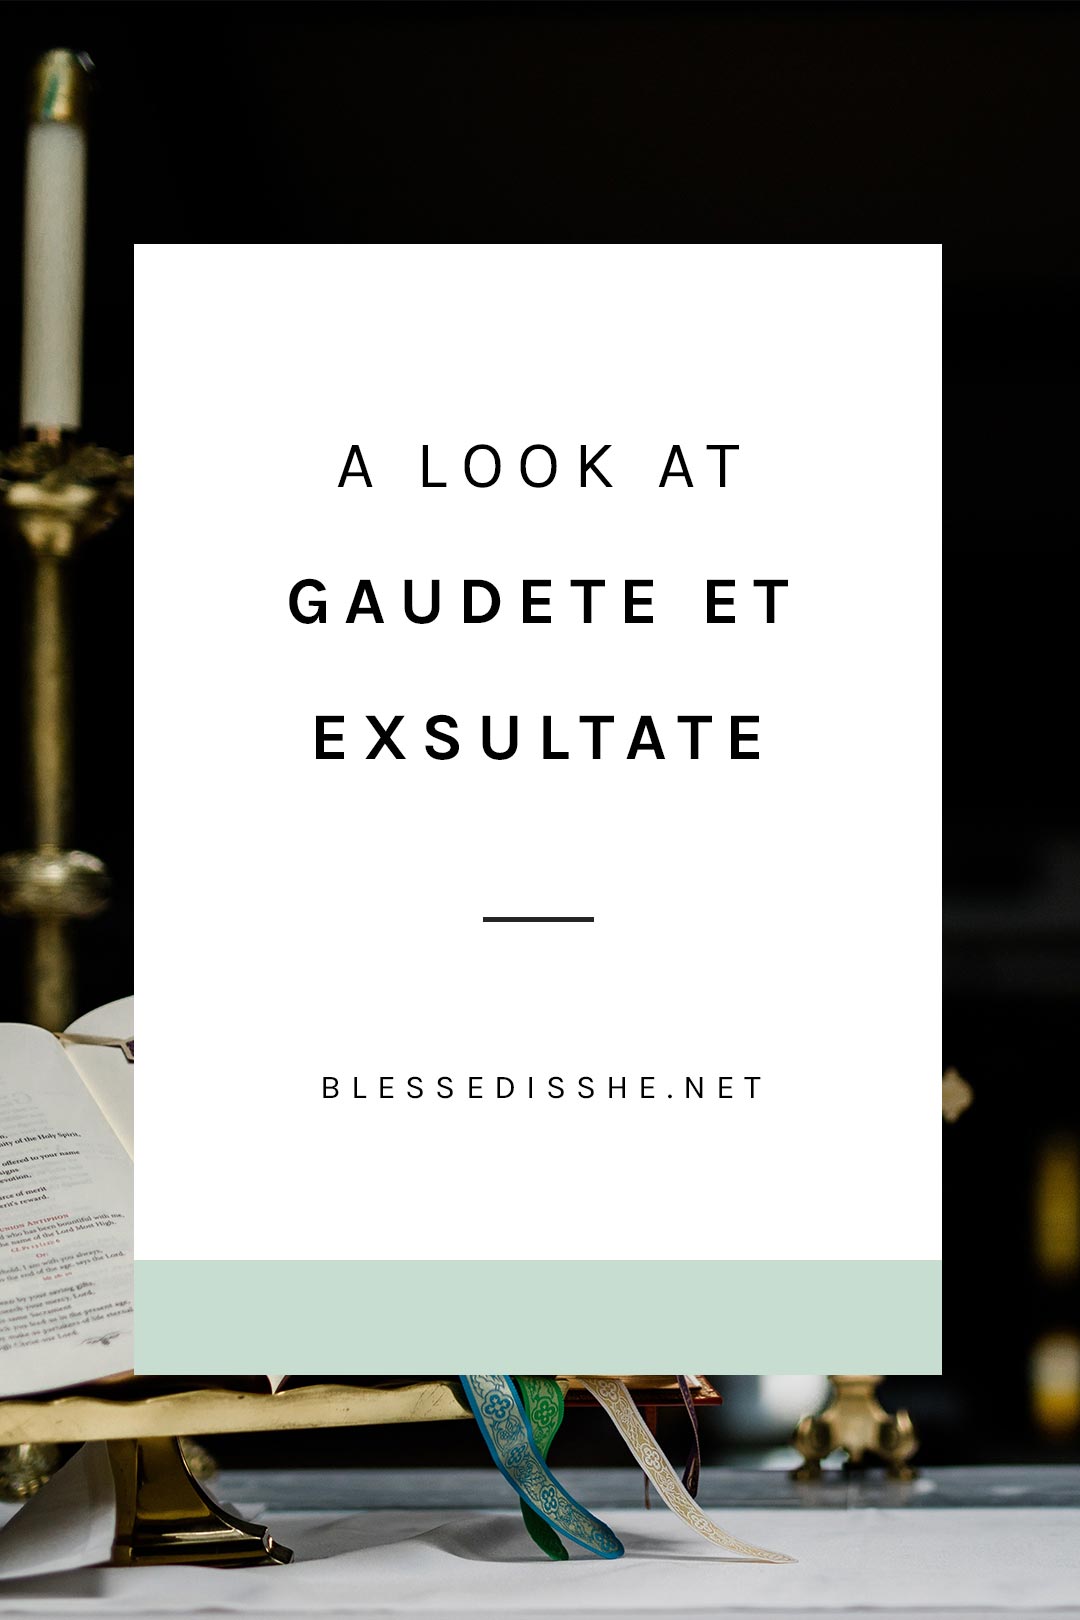 Gaudete Et Exsultate: On the Call to Holiness in Today's World